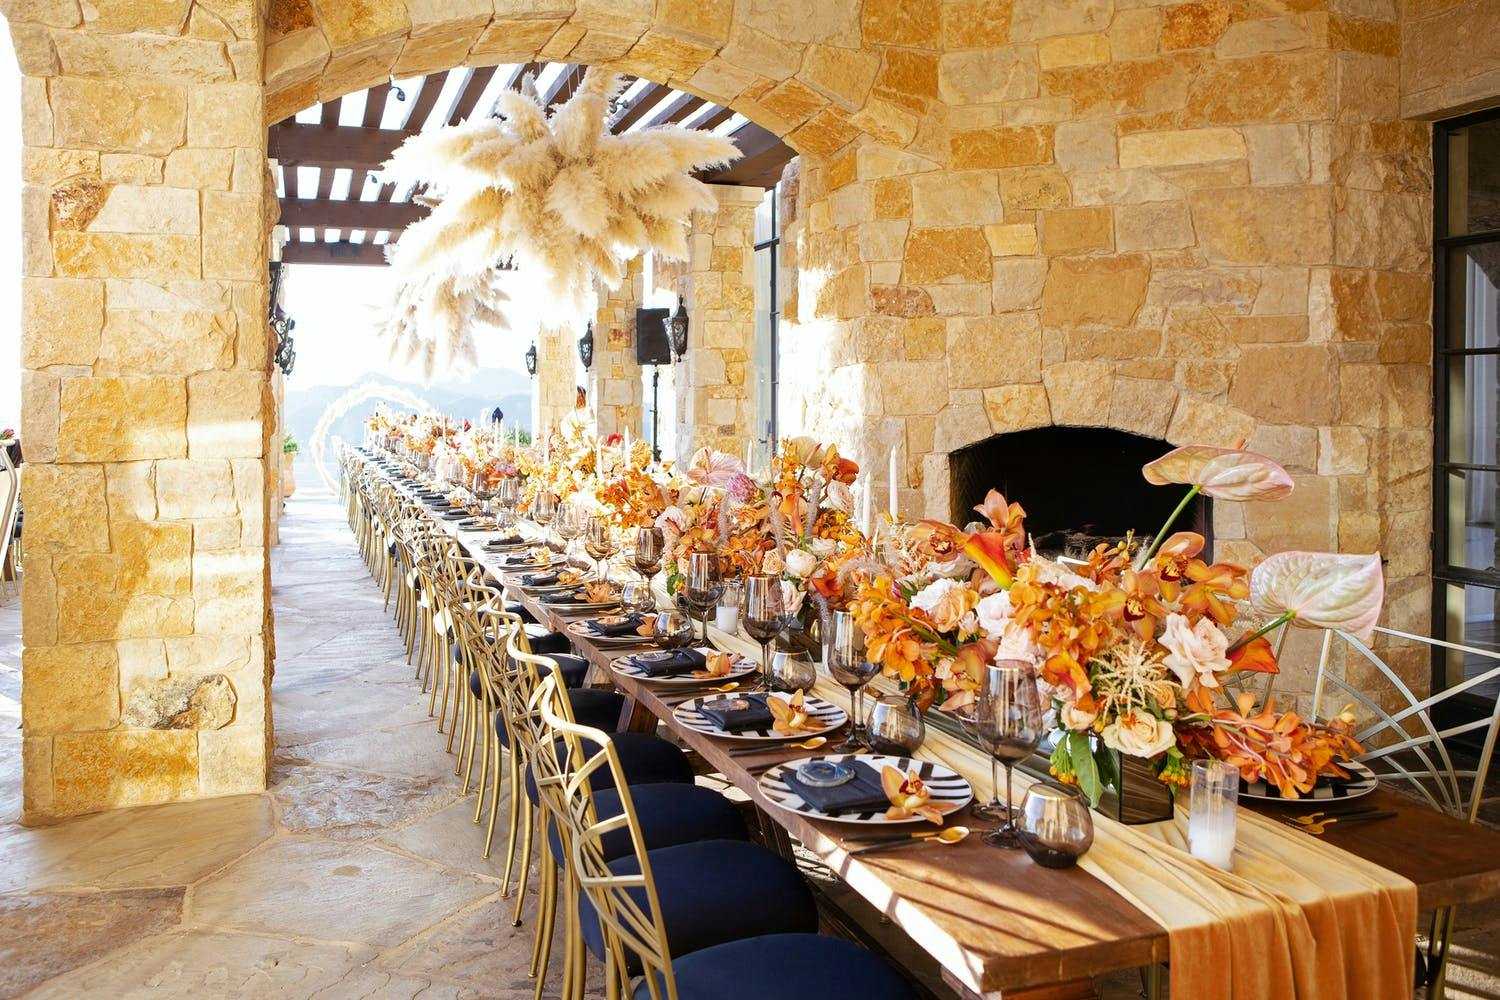 Fall wedding centerpieces of suspended pampas grass and orange flowers | PartySlate